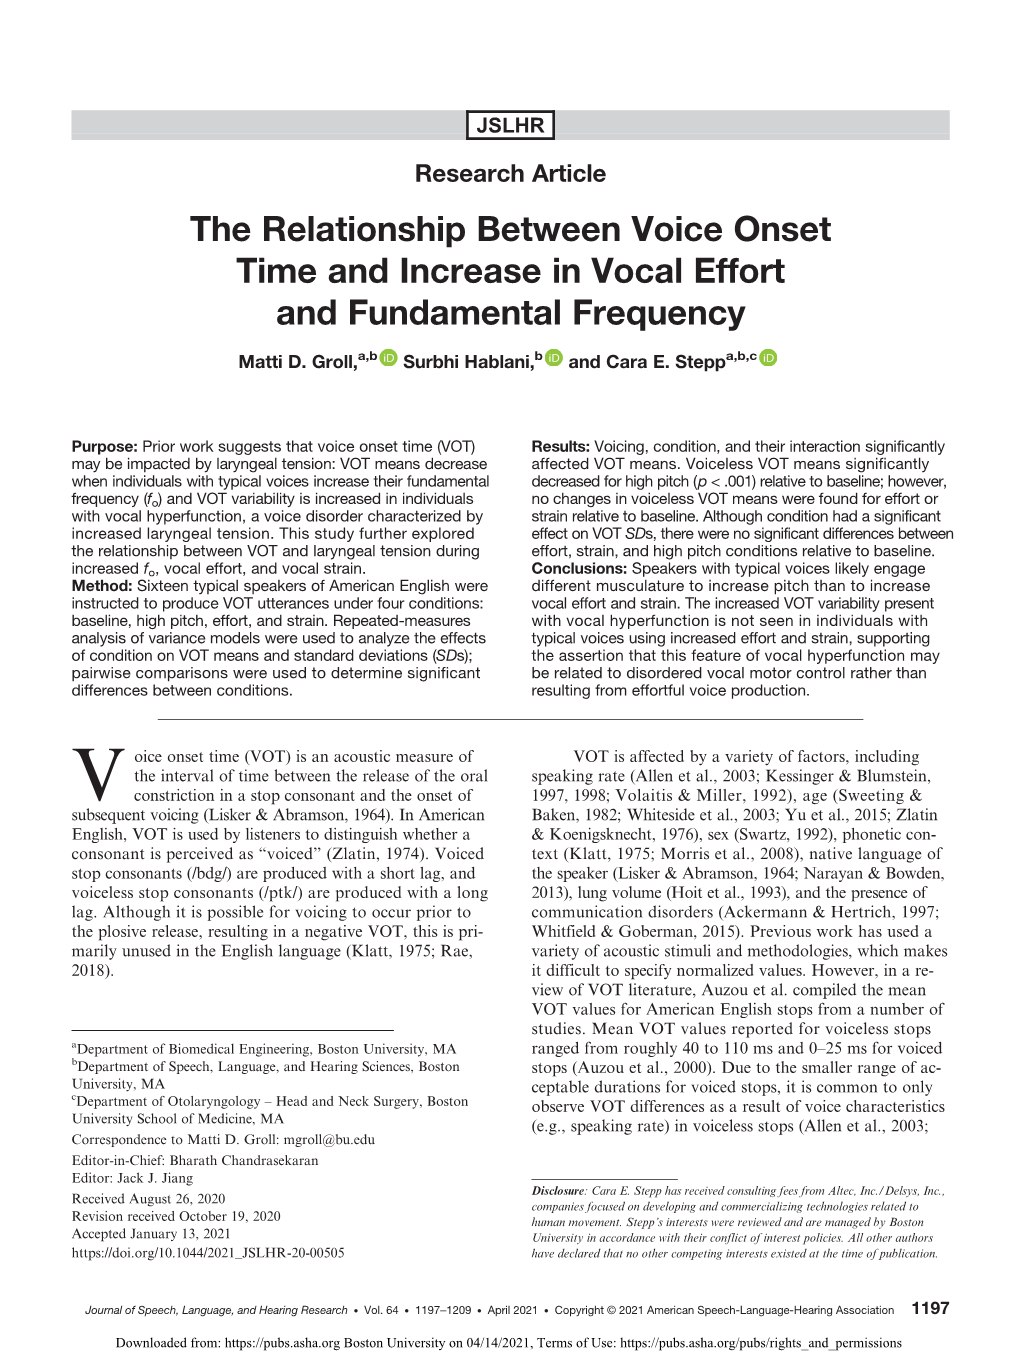 The Relationship Between Voice Onset Time and Increases